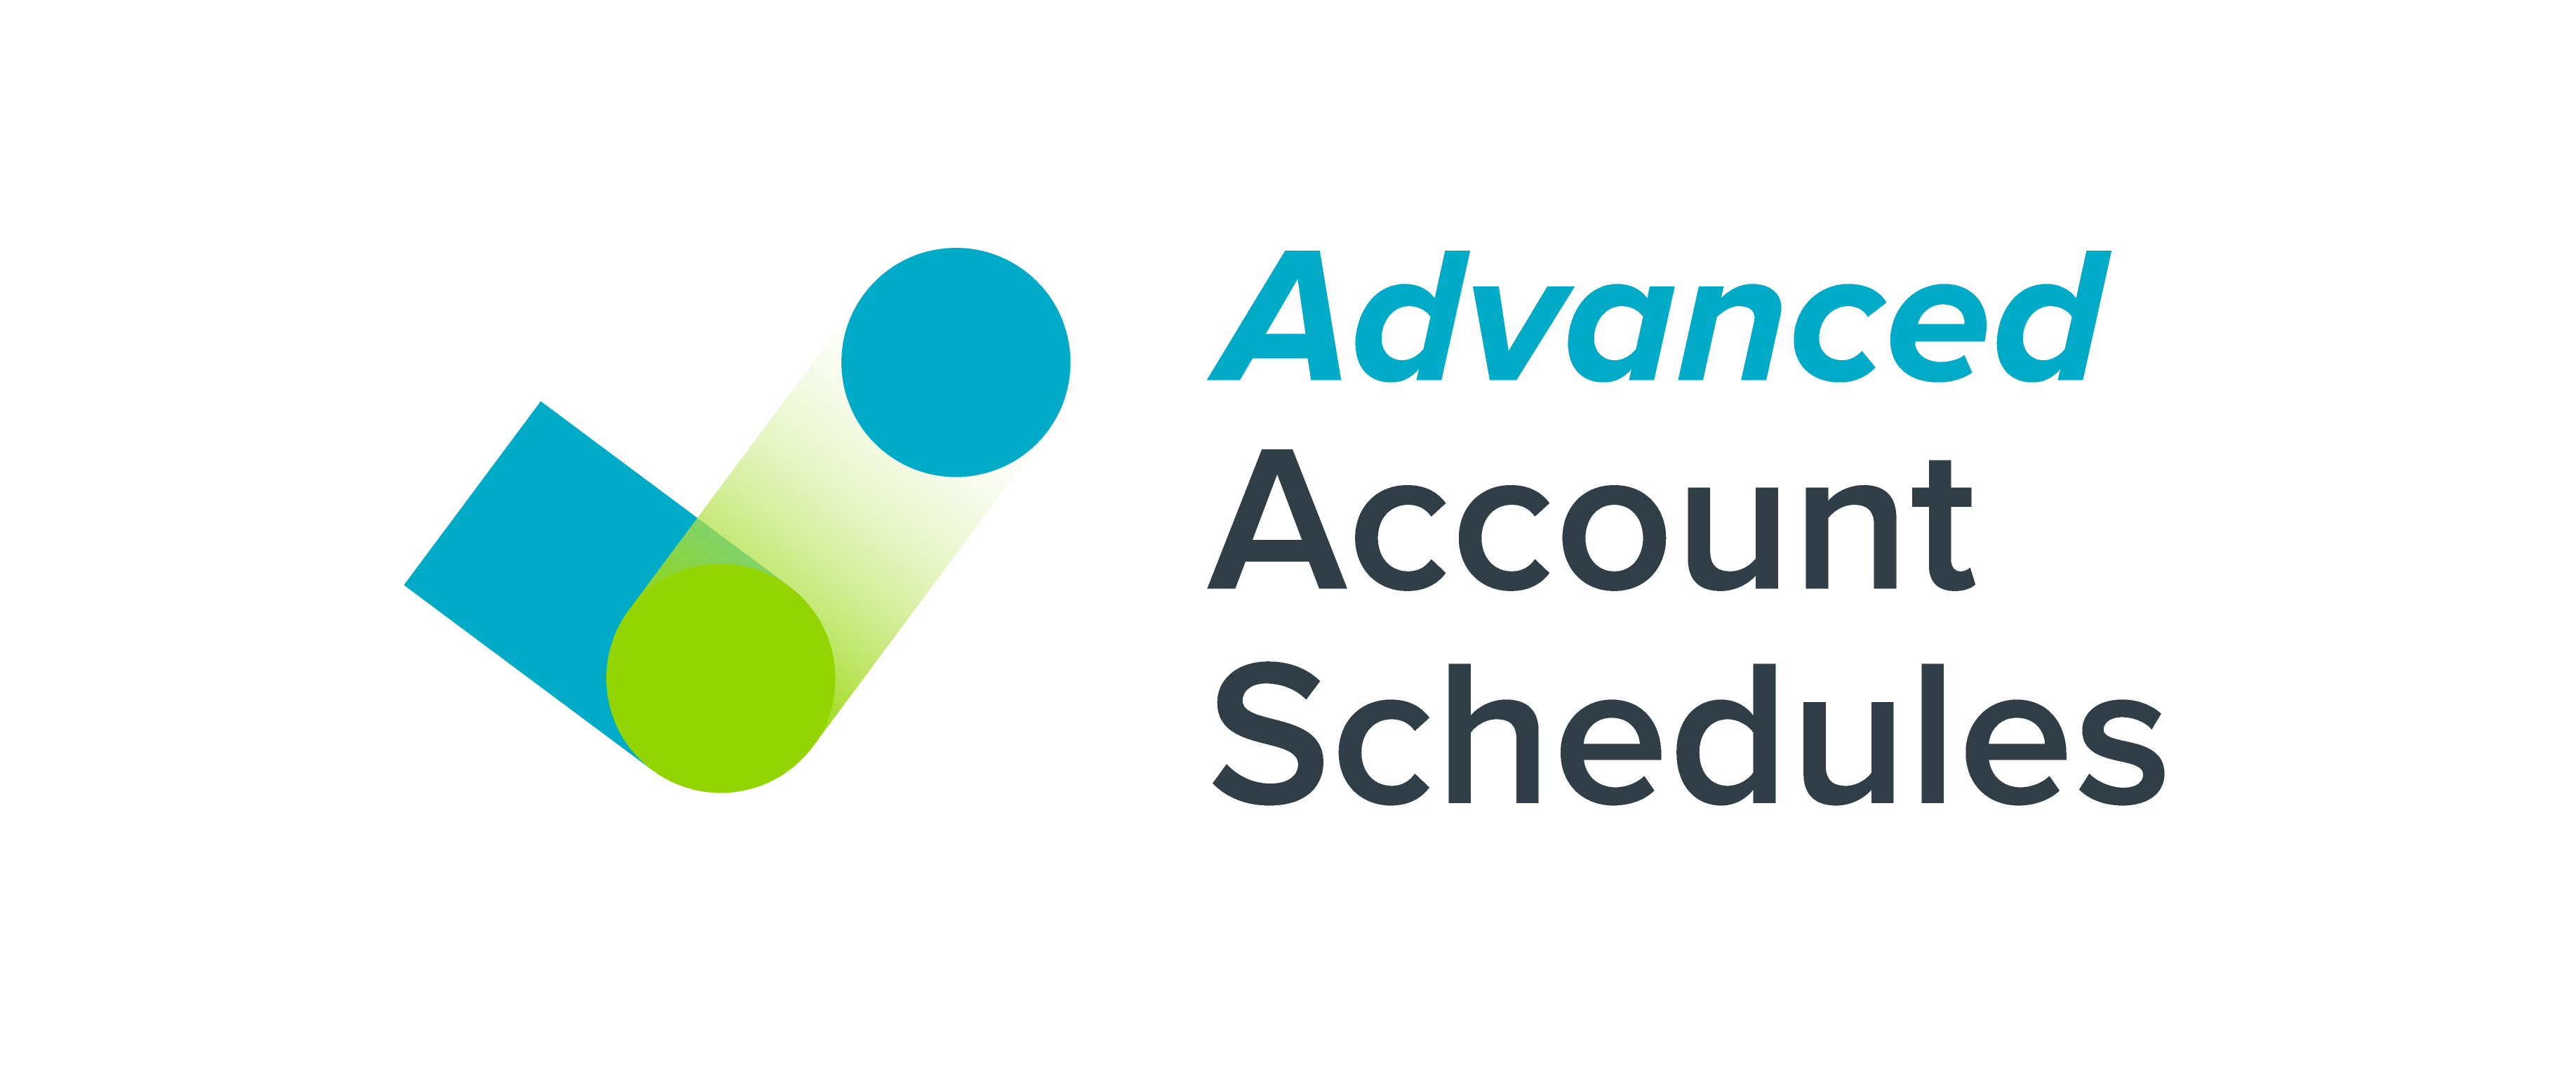 advanced account schedules app for dynamics 365 business central